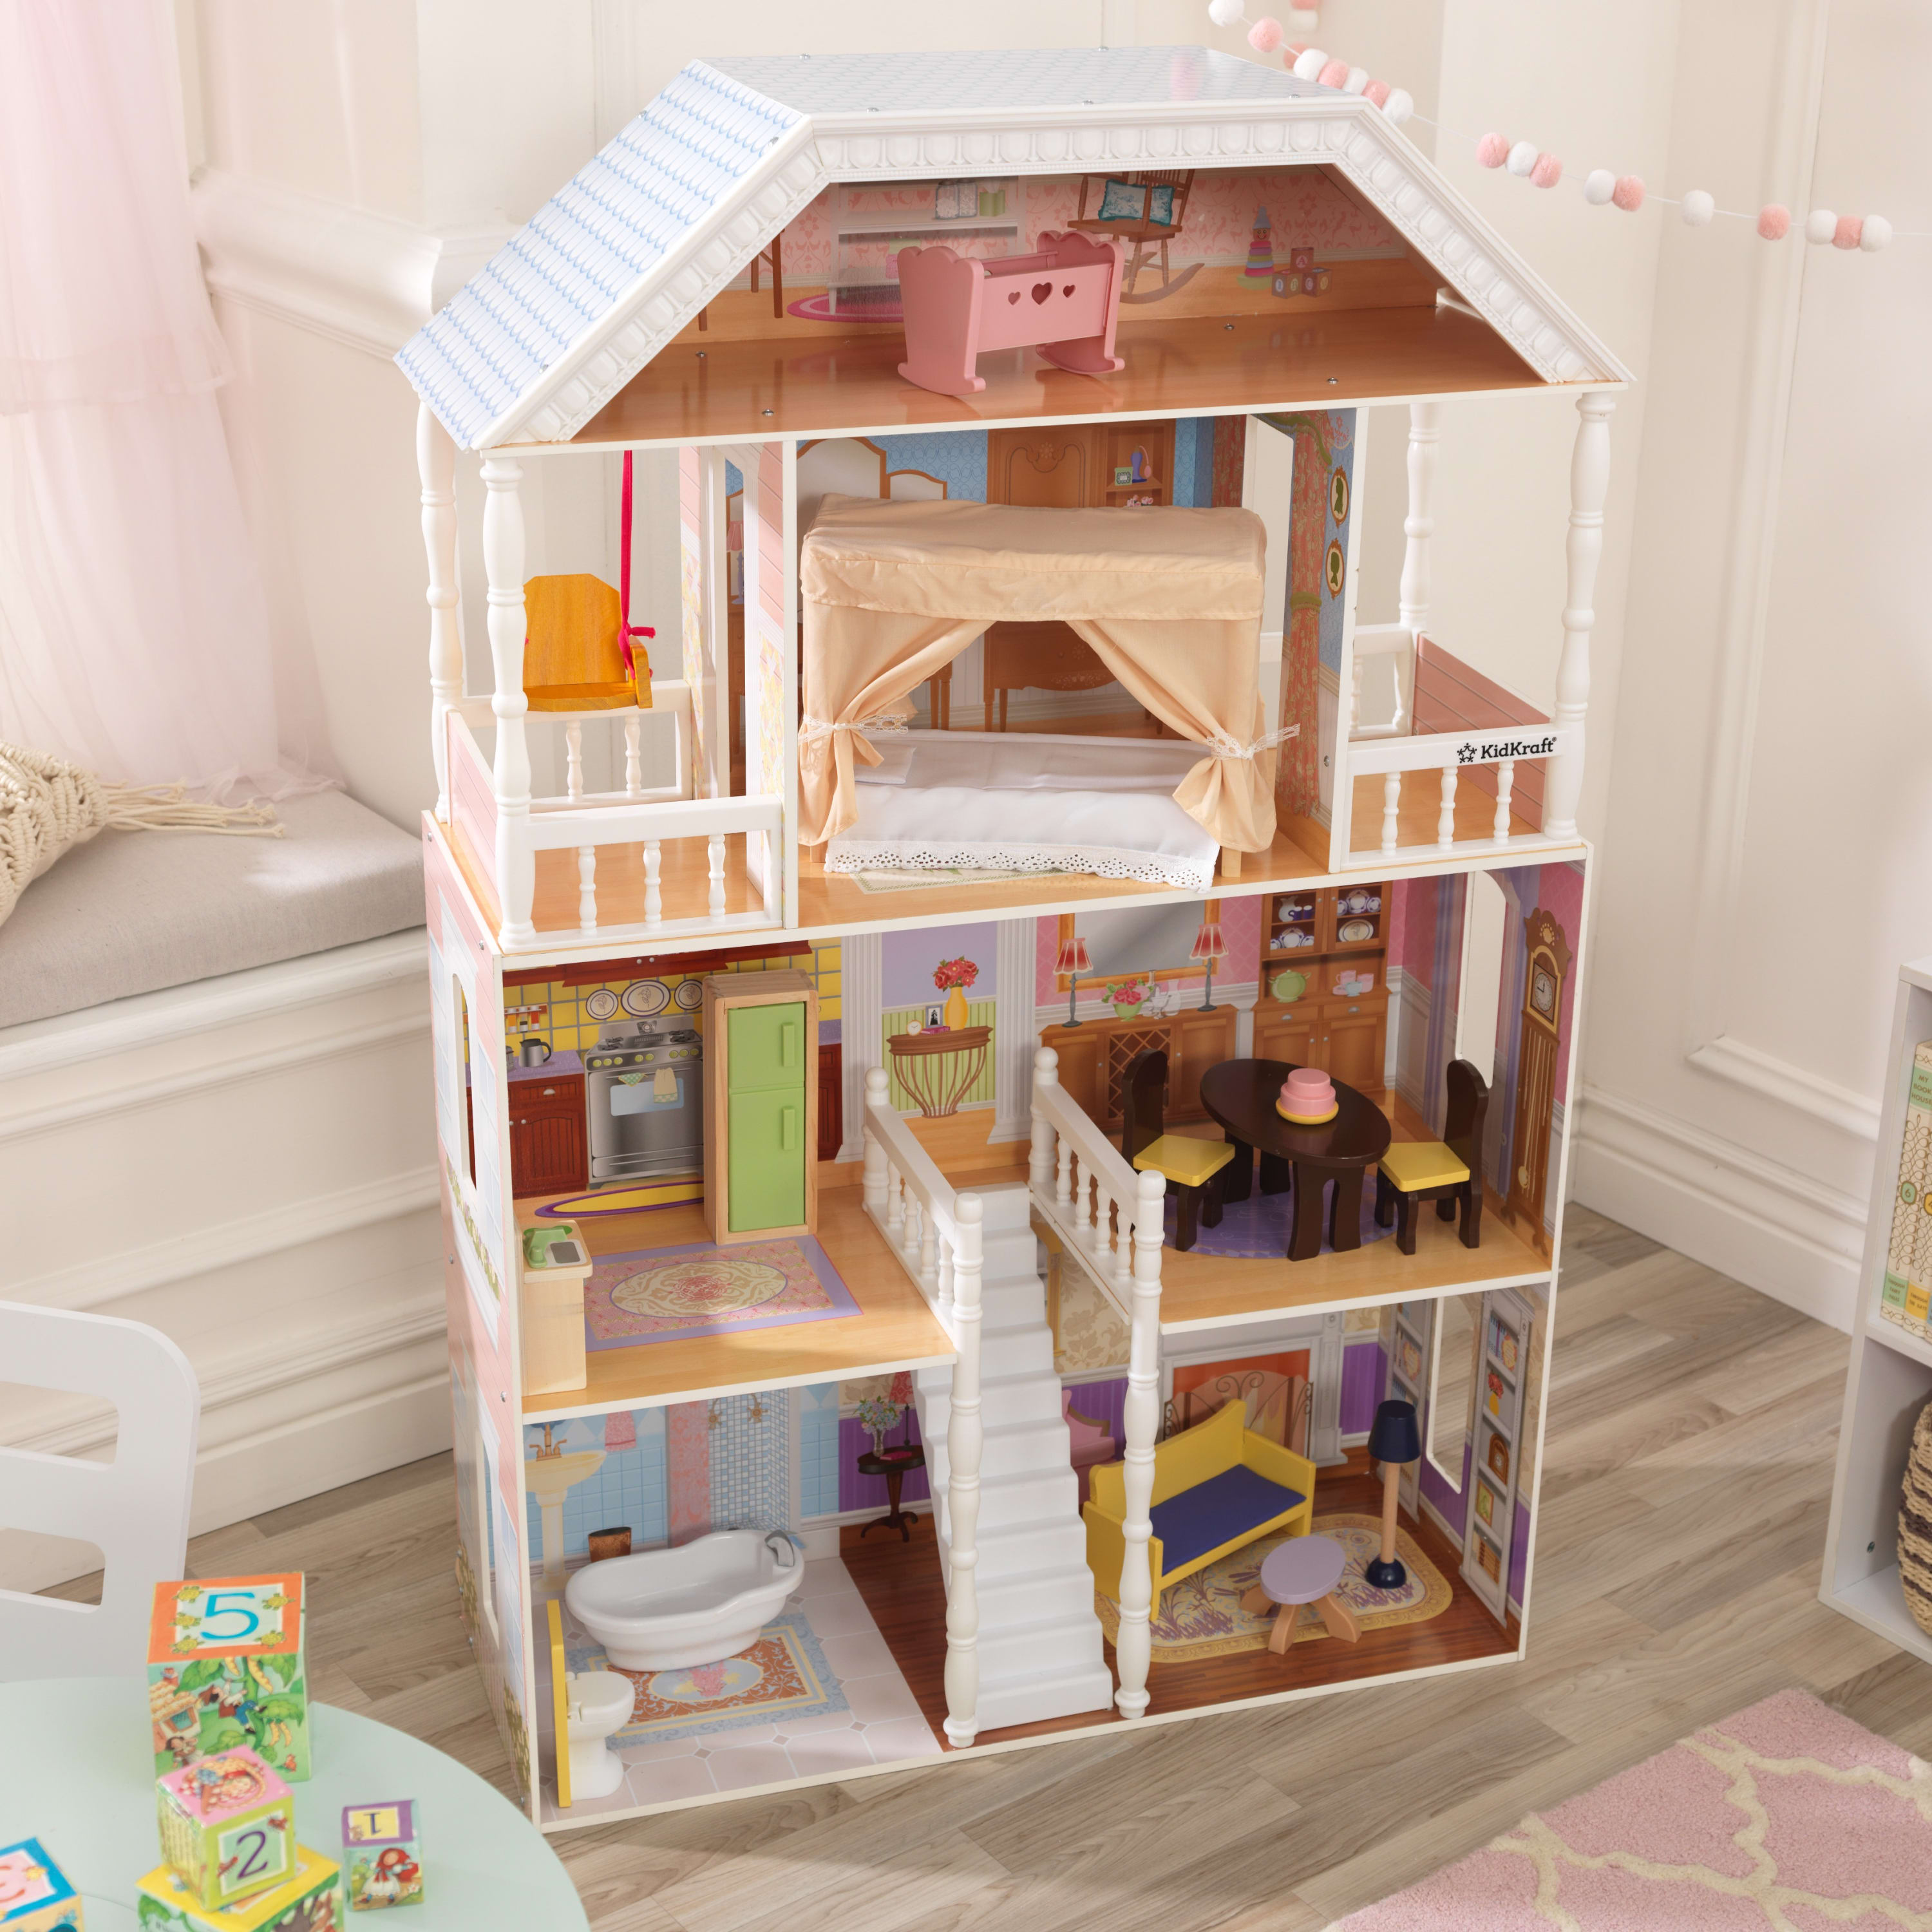 KidKraft Savannah Wooden Dollhouse with Porch Swing and 14 Accessories, Ages 3 and up - image 8 of 10